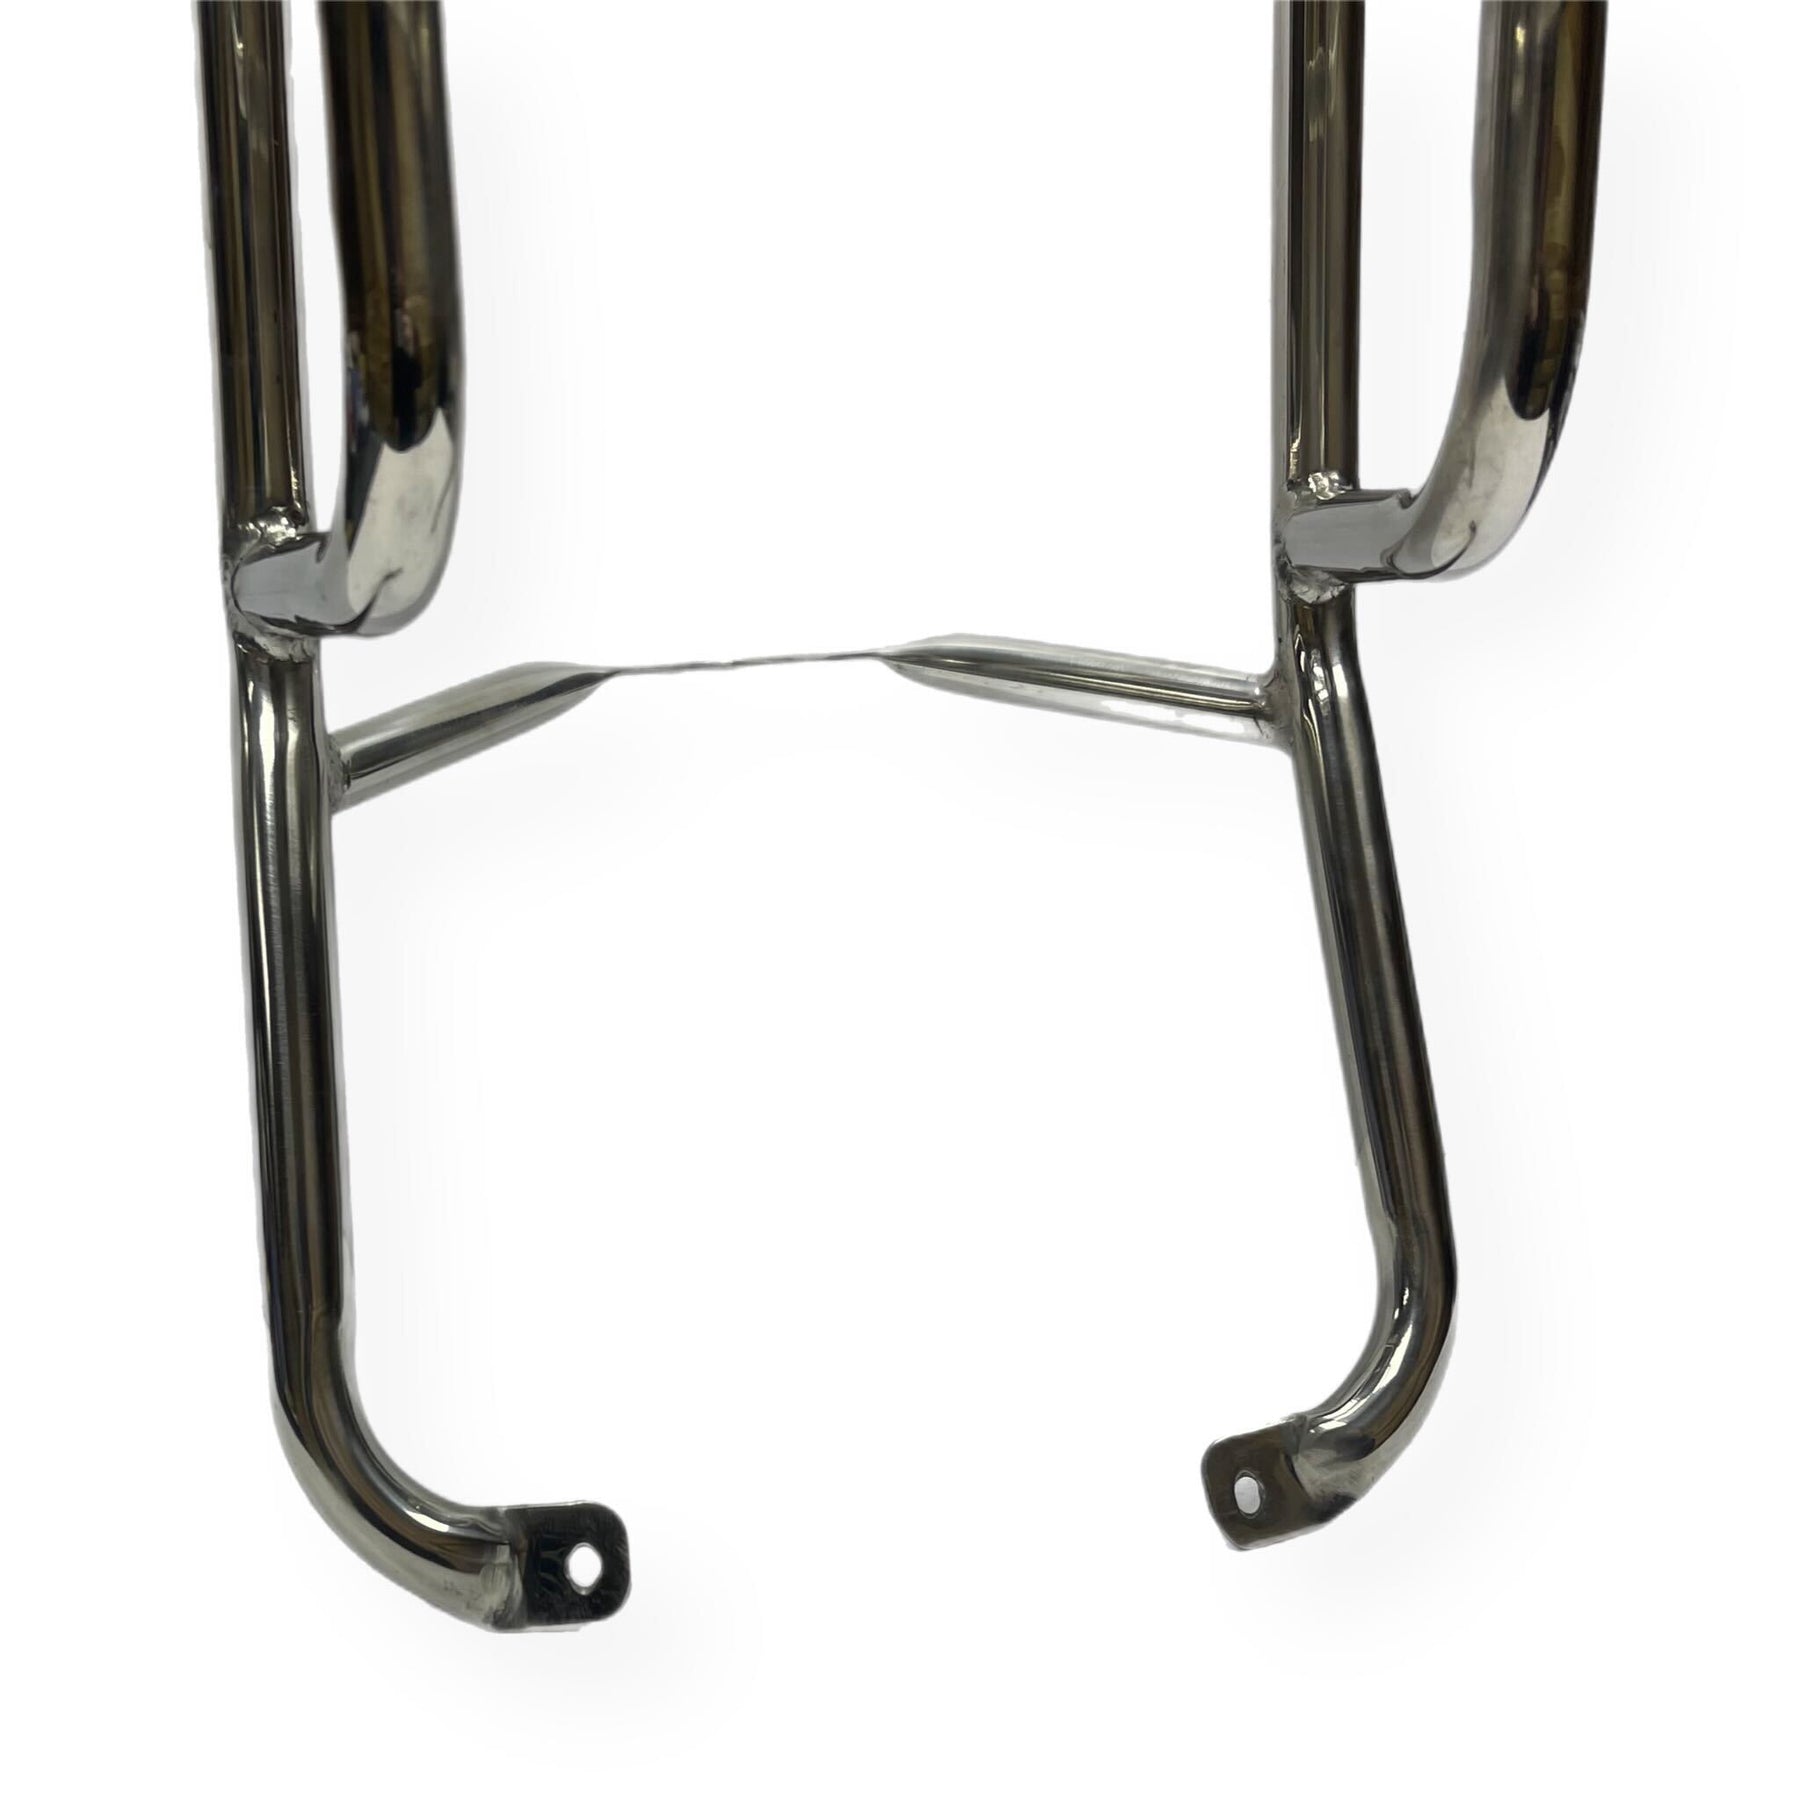 Vespa PX PE T5 Classic 3 in 1 Rear Carrier - Polished Stainless Steel